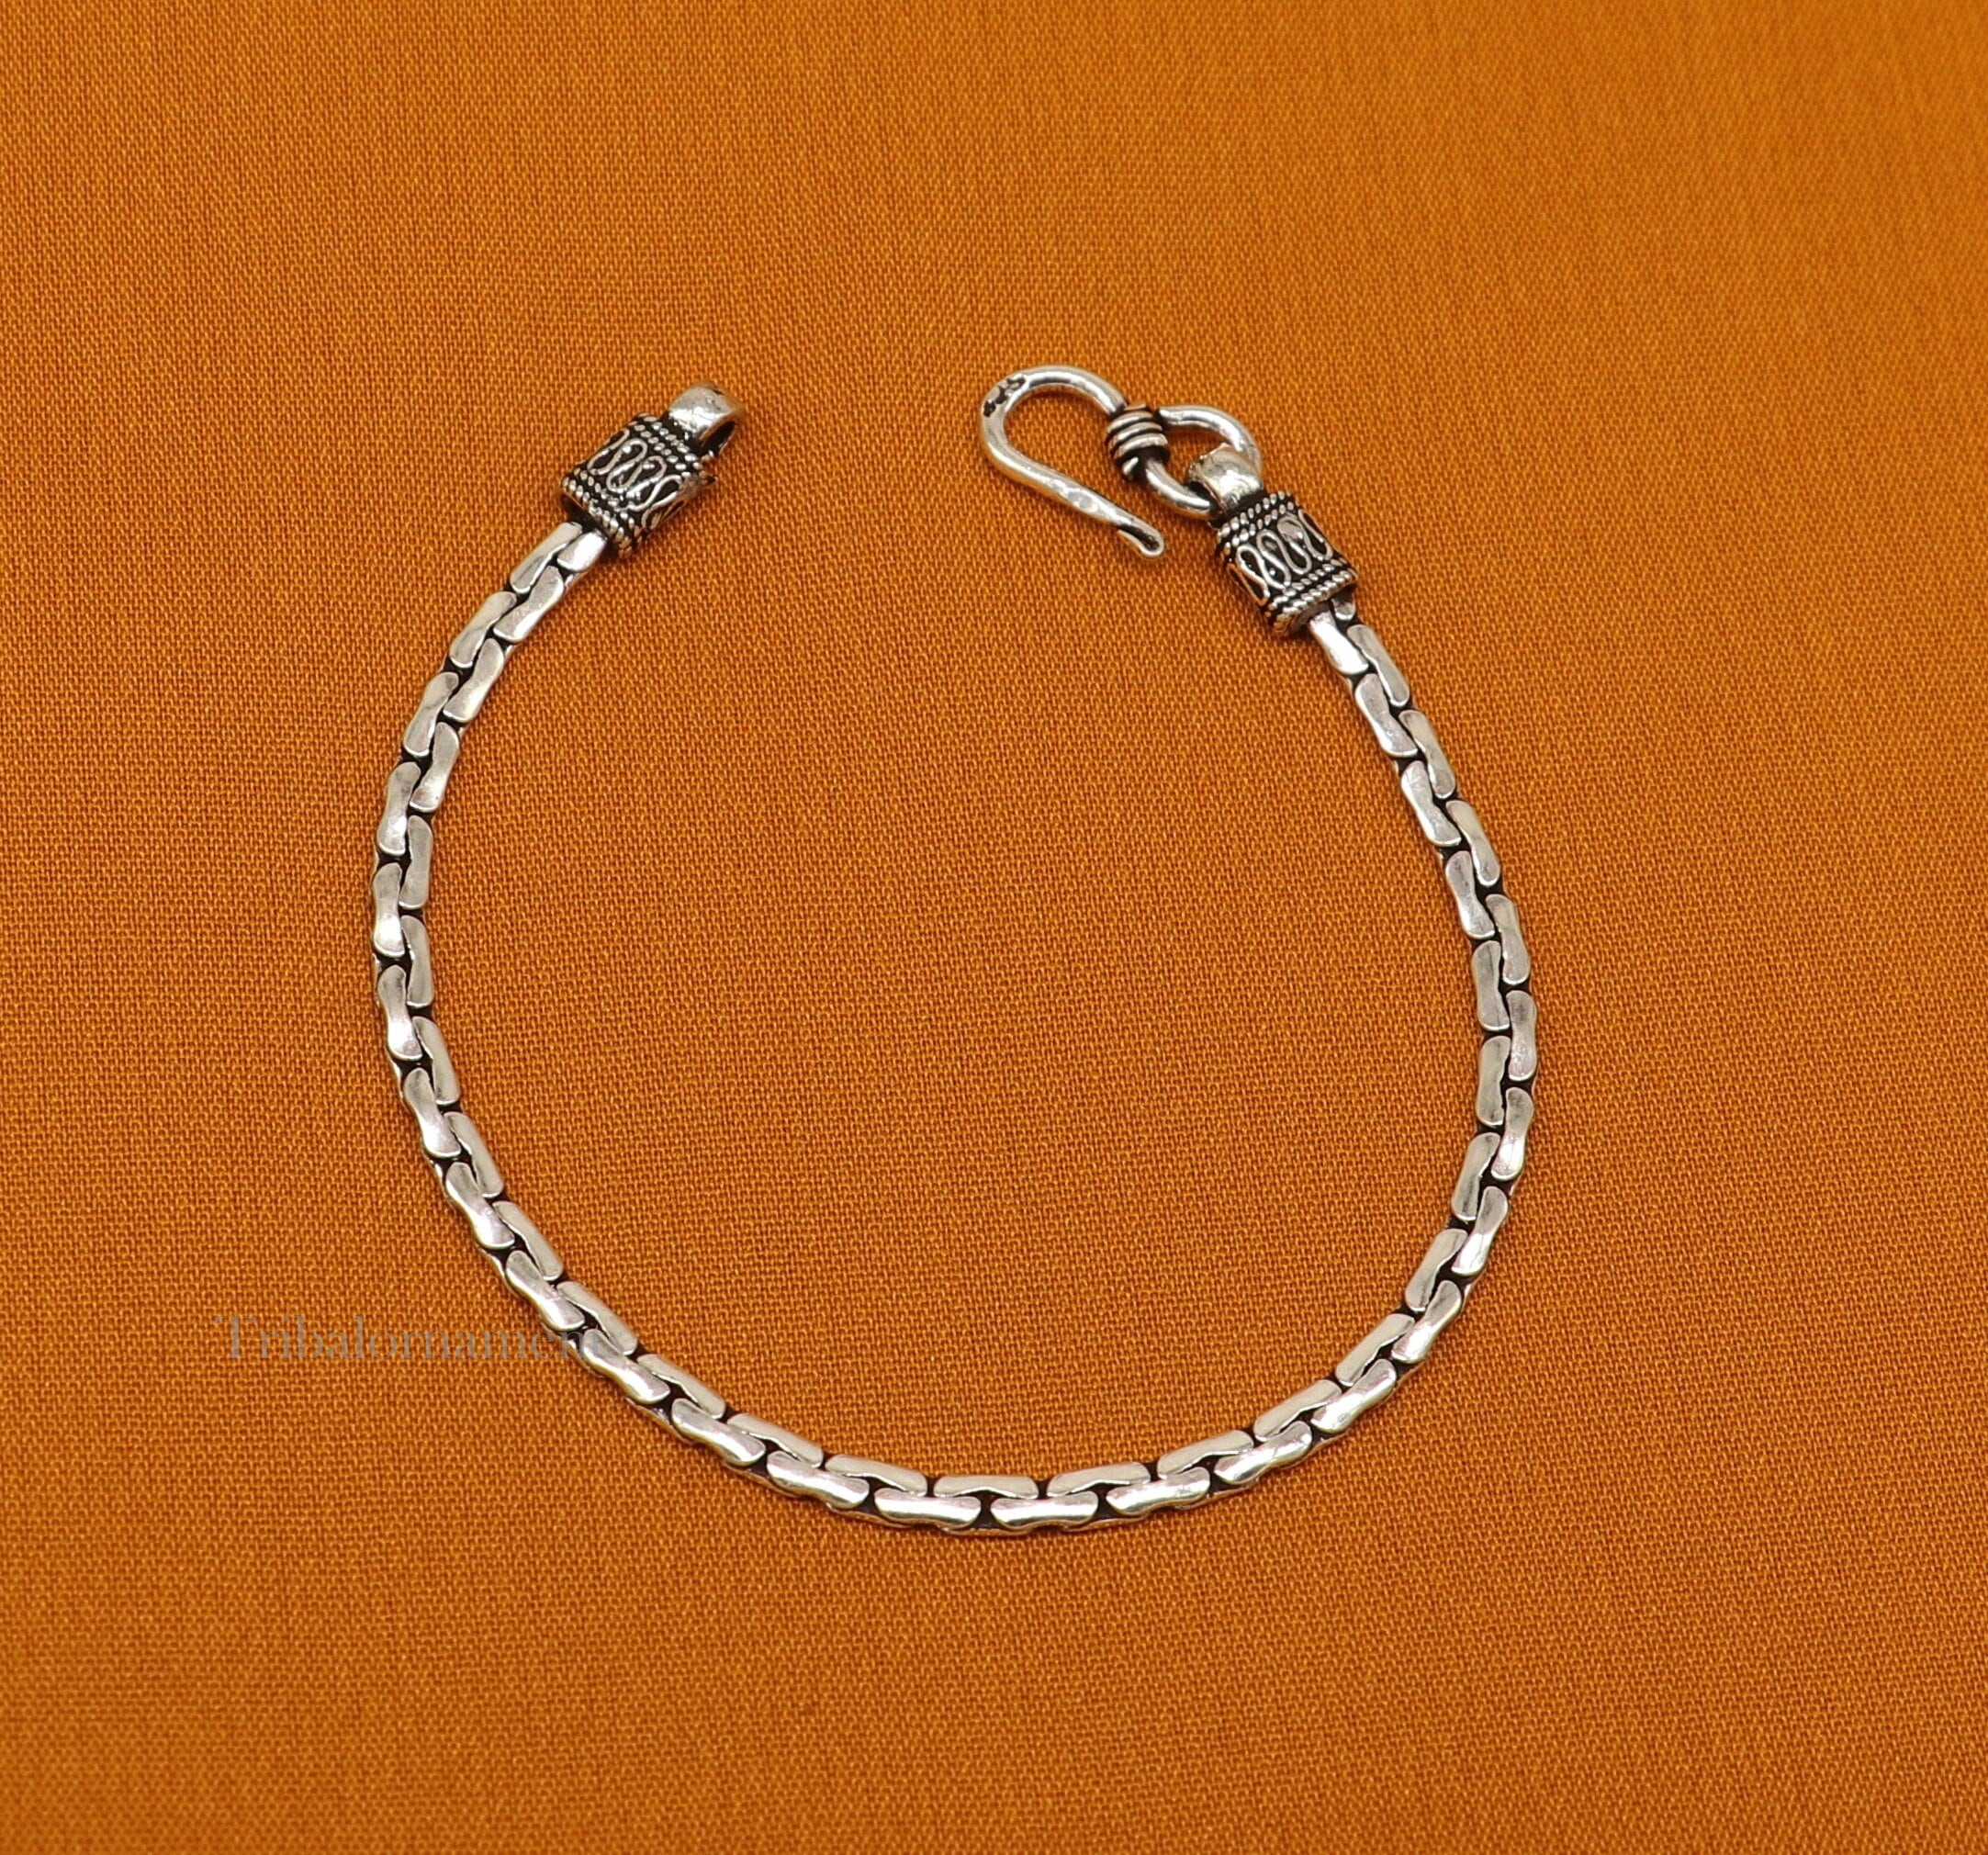 Men's Sterling Silver Byzantine and Curb Chain Bracelet - Jewelry1000.com |  Mens silver jewelry, Mens bracelet silver, Sterling silver mens